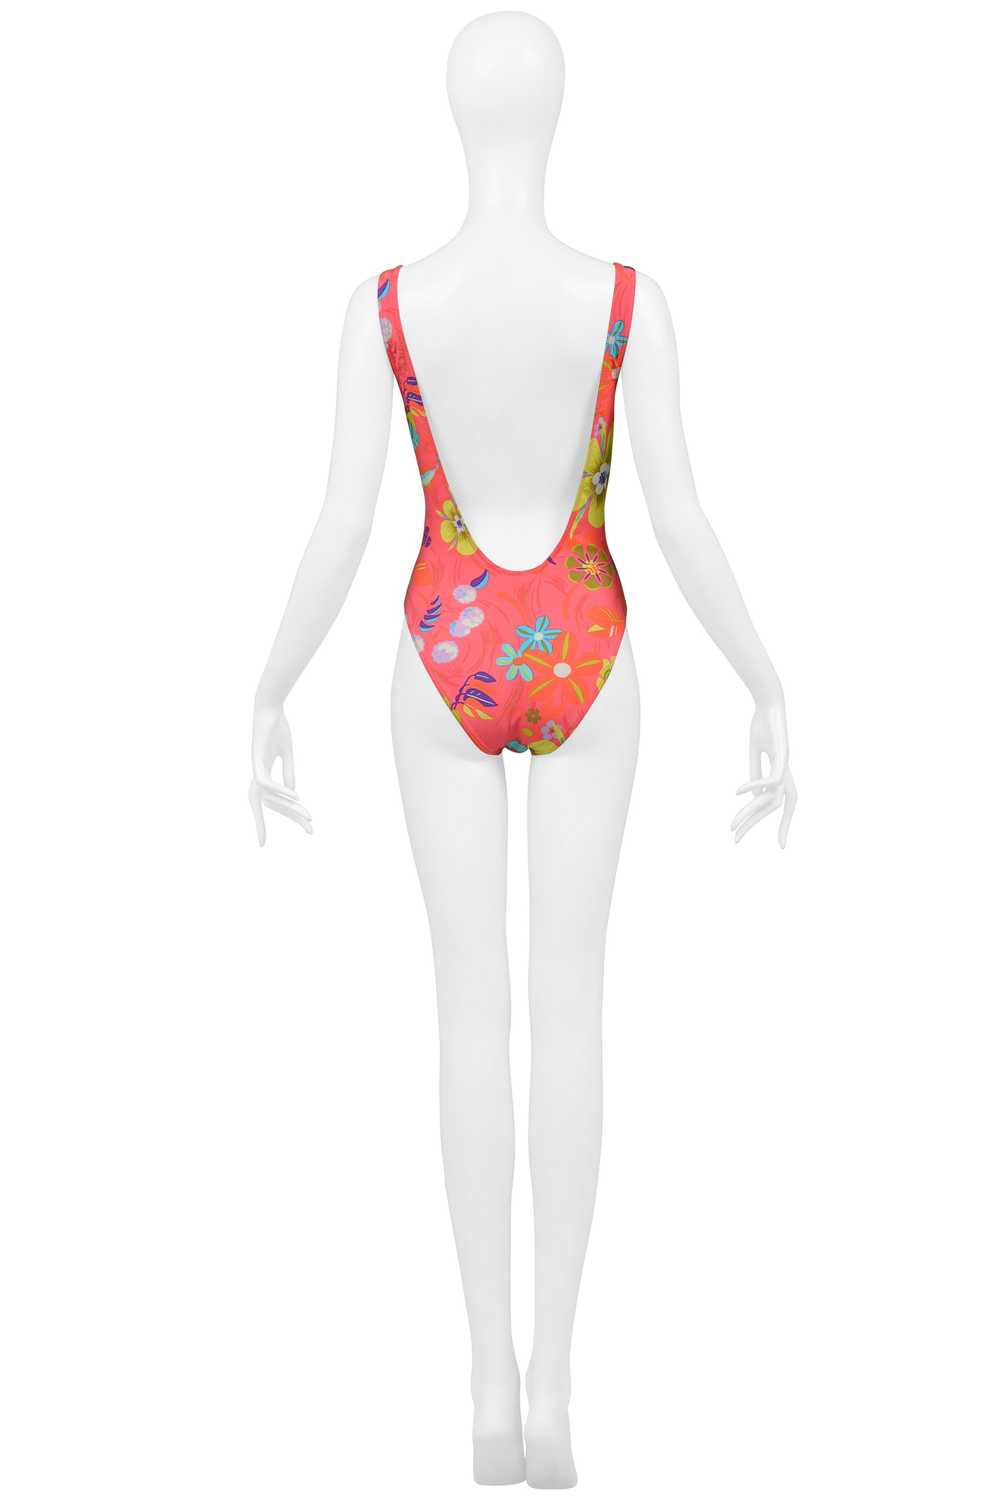 GUCCI BY TOM FORD PINK FLORAL PRINT ONE PIECE SWI… - image 6